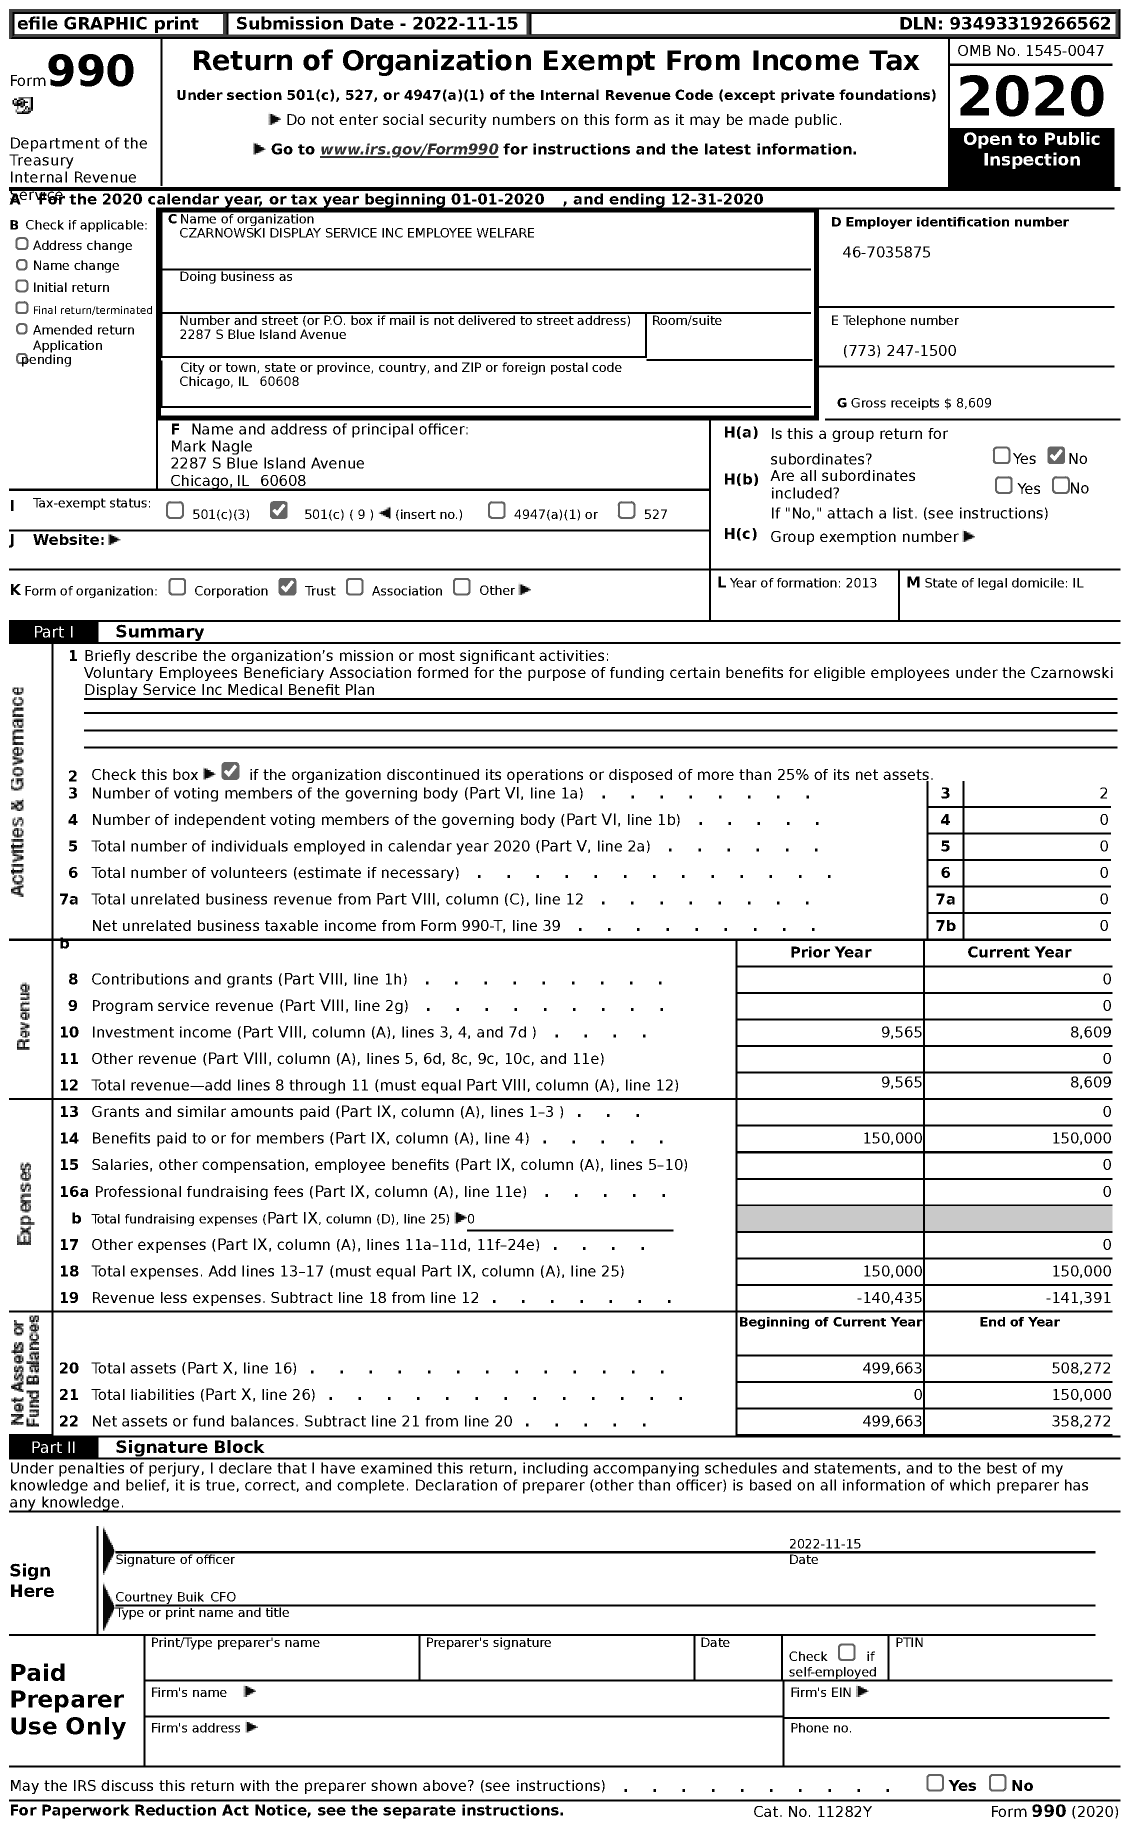 Image of first page of 2020 Form 990 for Czarnowski Display Service Employee Welfare Benefit Trust